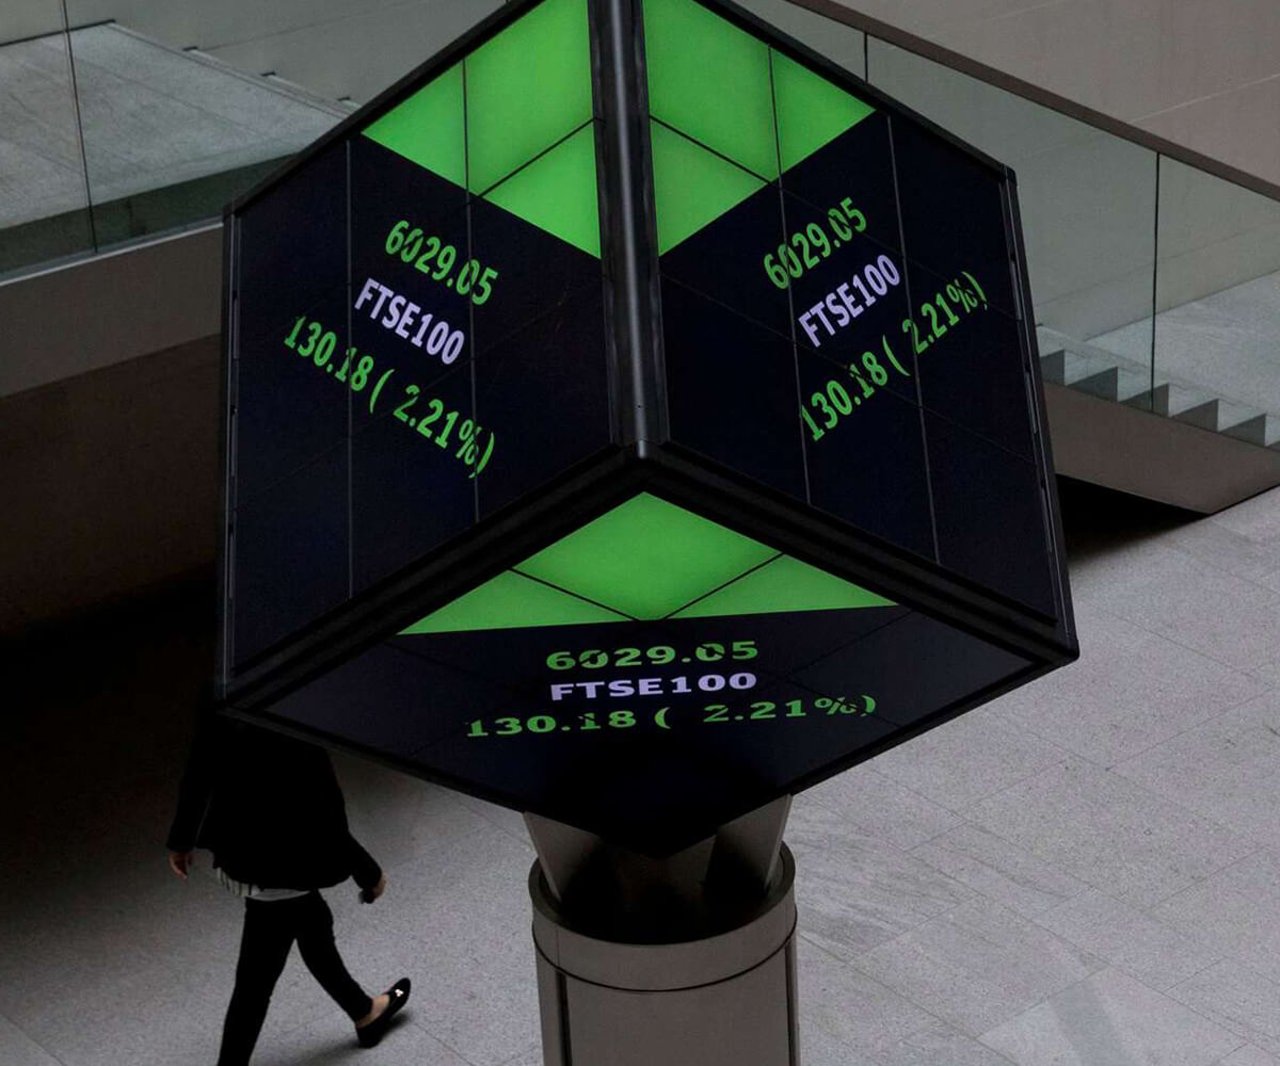 Cube shaped display inside the London Stock Exchange showing prices.